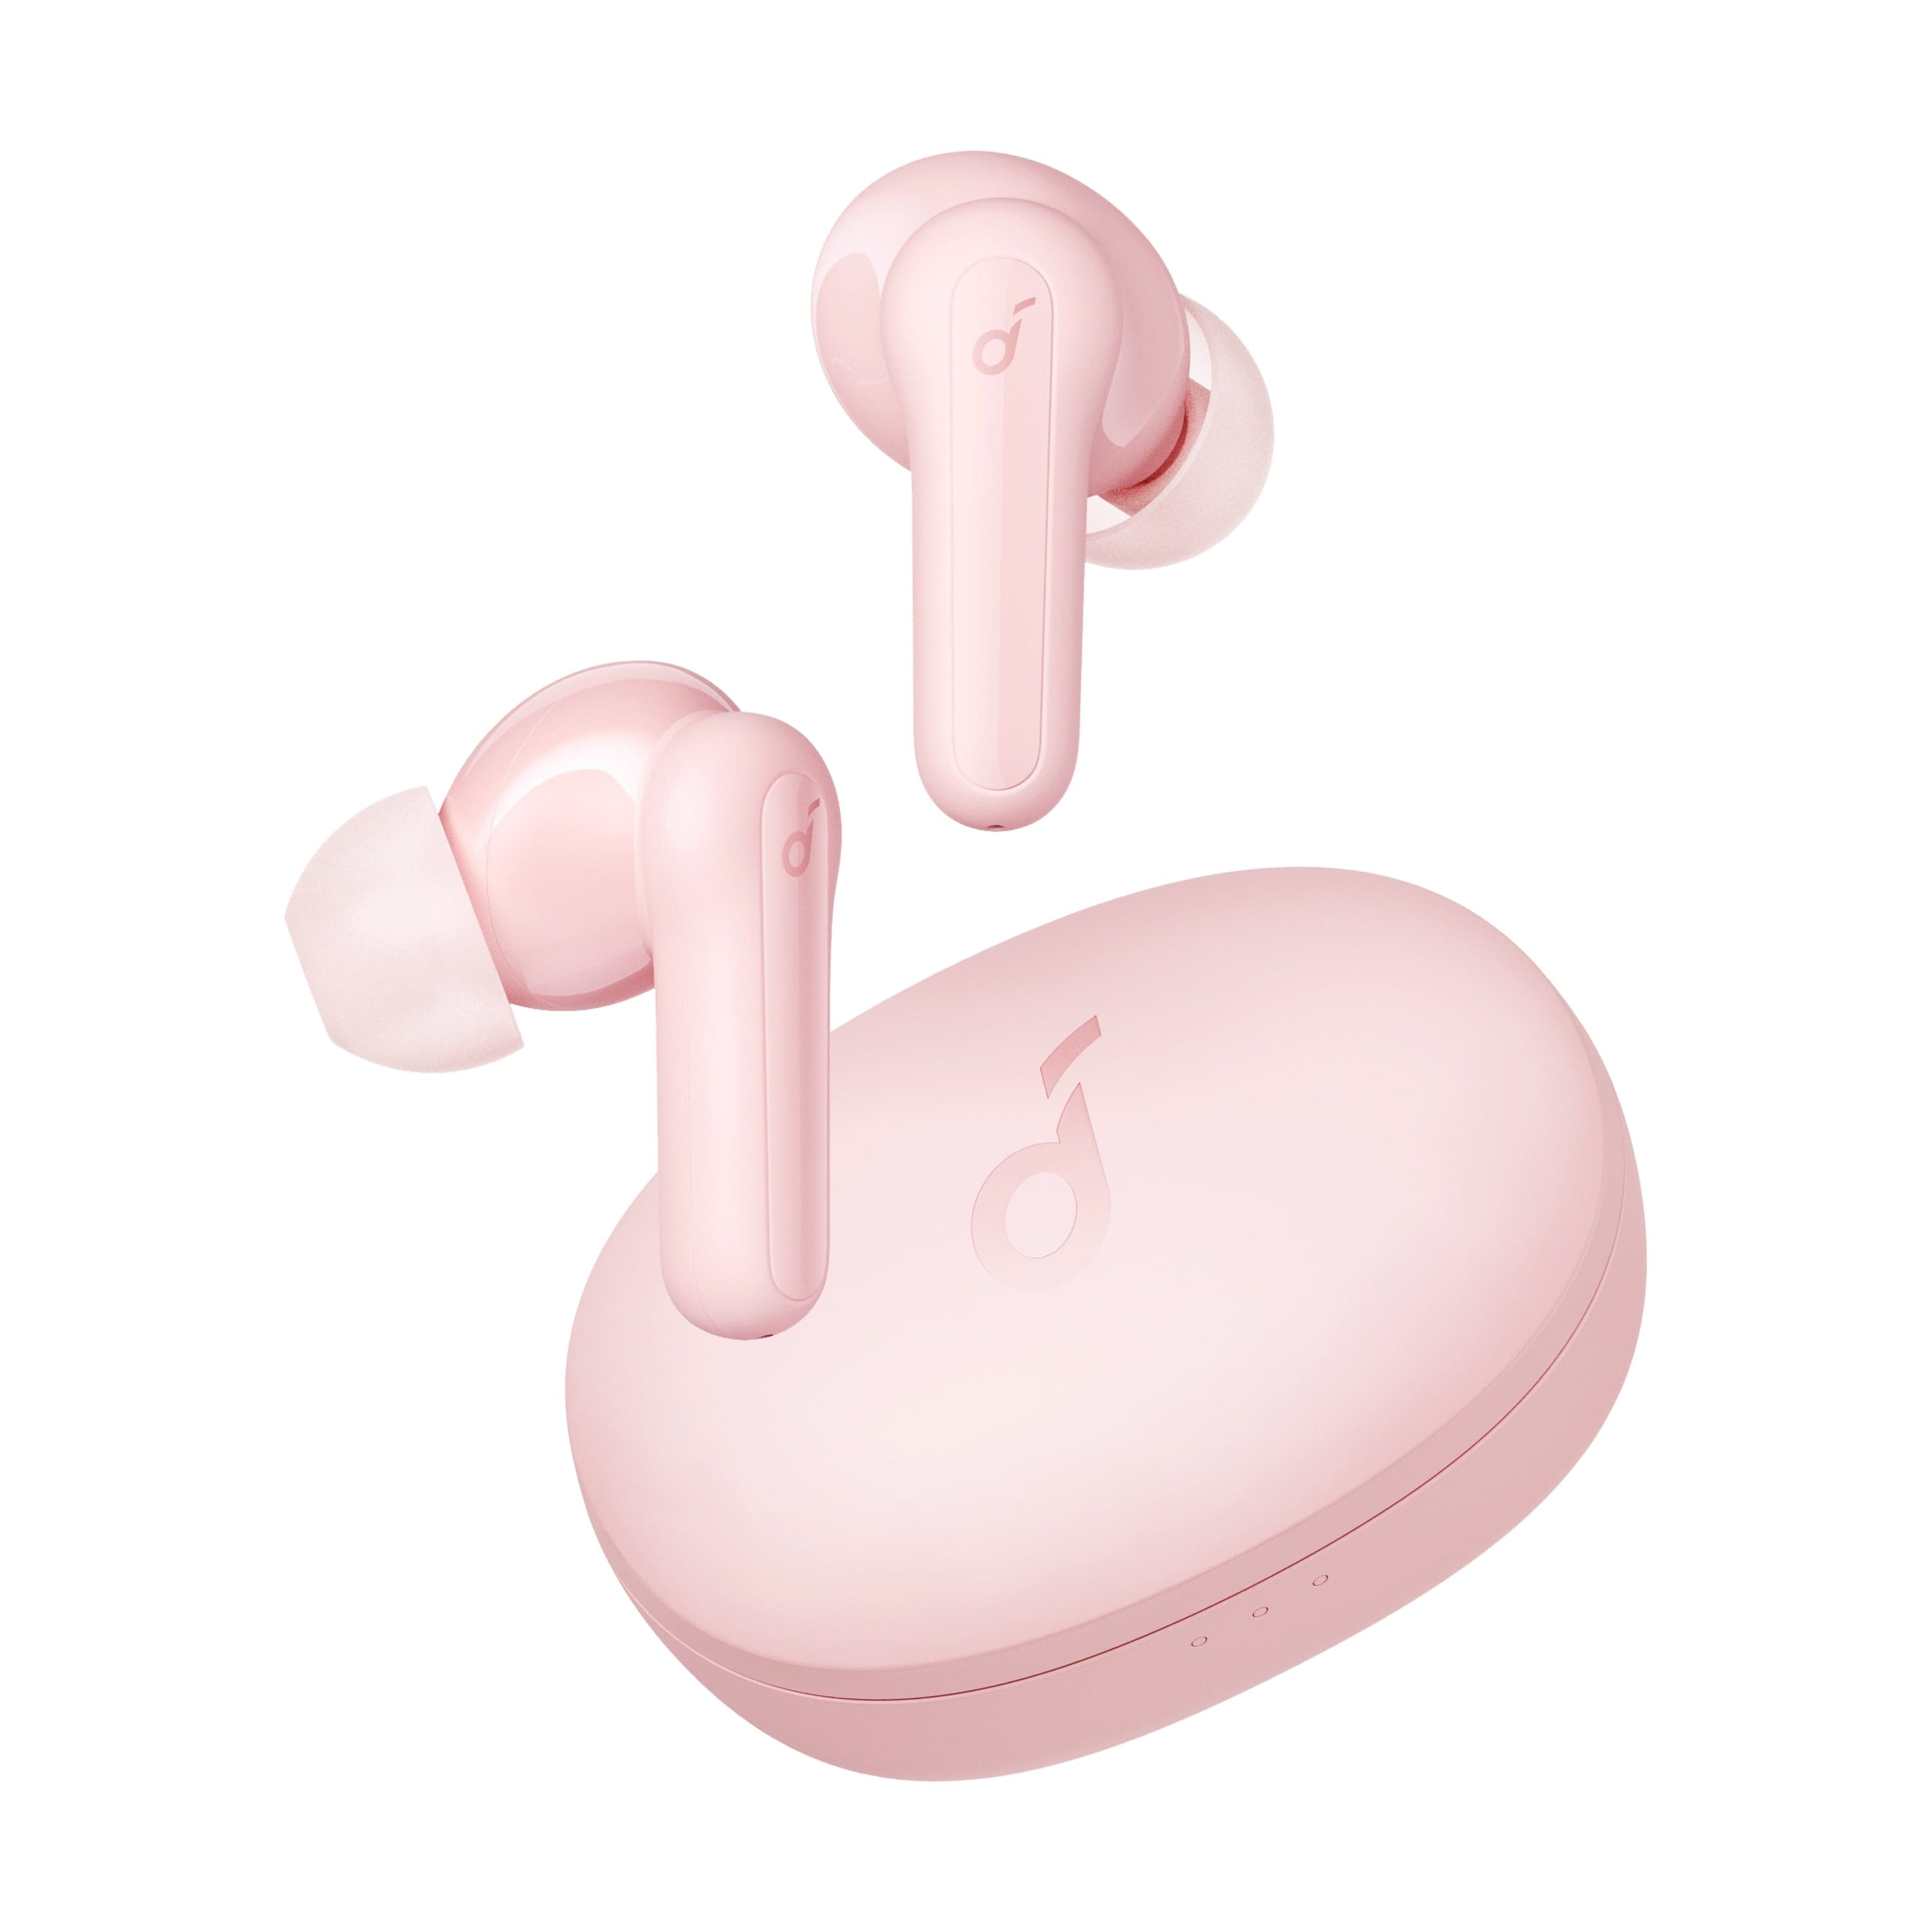 Soundcore Soundcore, Wireless Earbuds, Version Life P2 Mini True, Supports Bluetooth 5.2, Playtime up to 32 Hours, Color Pink